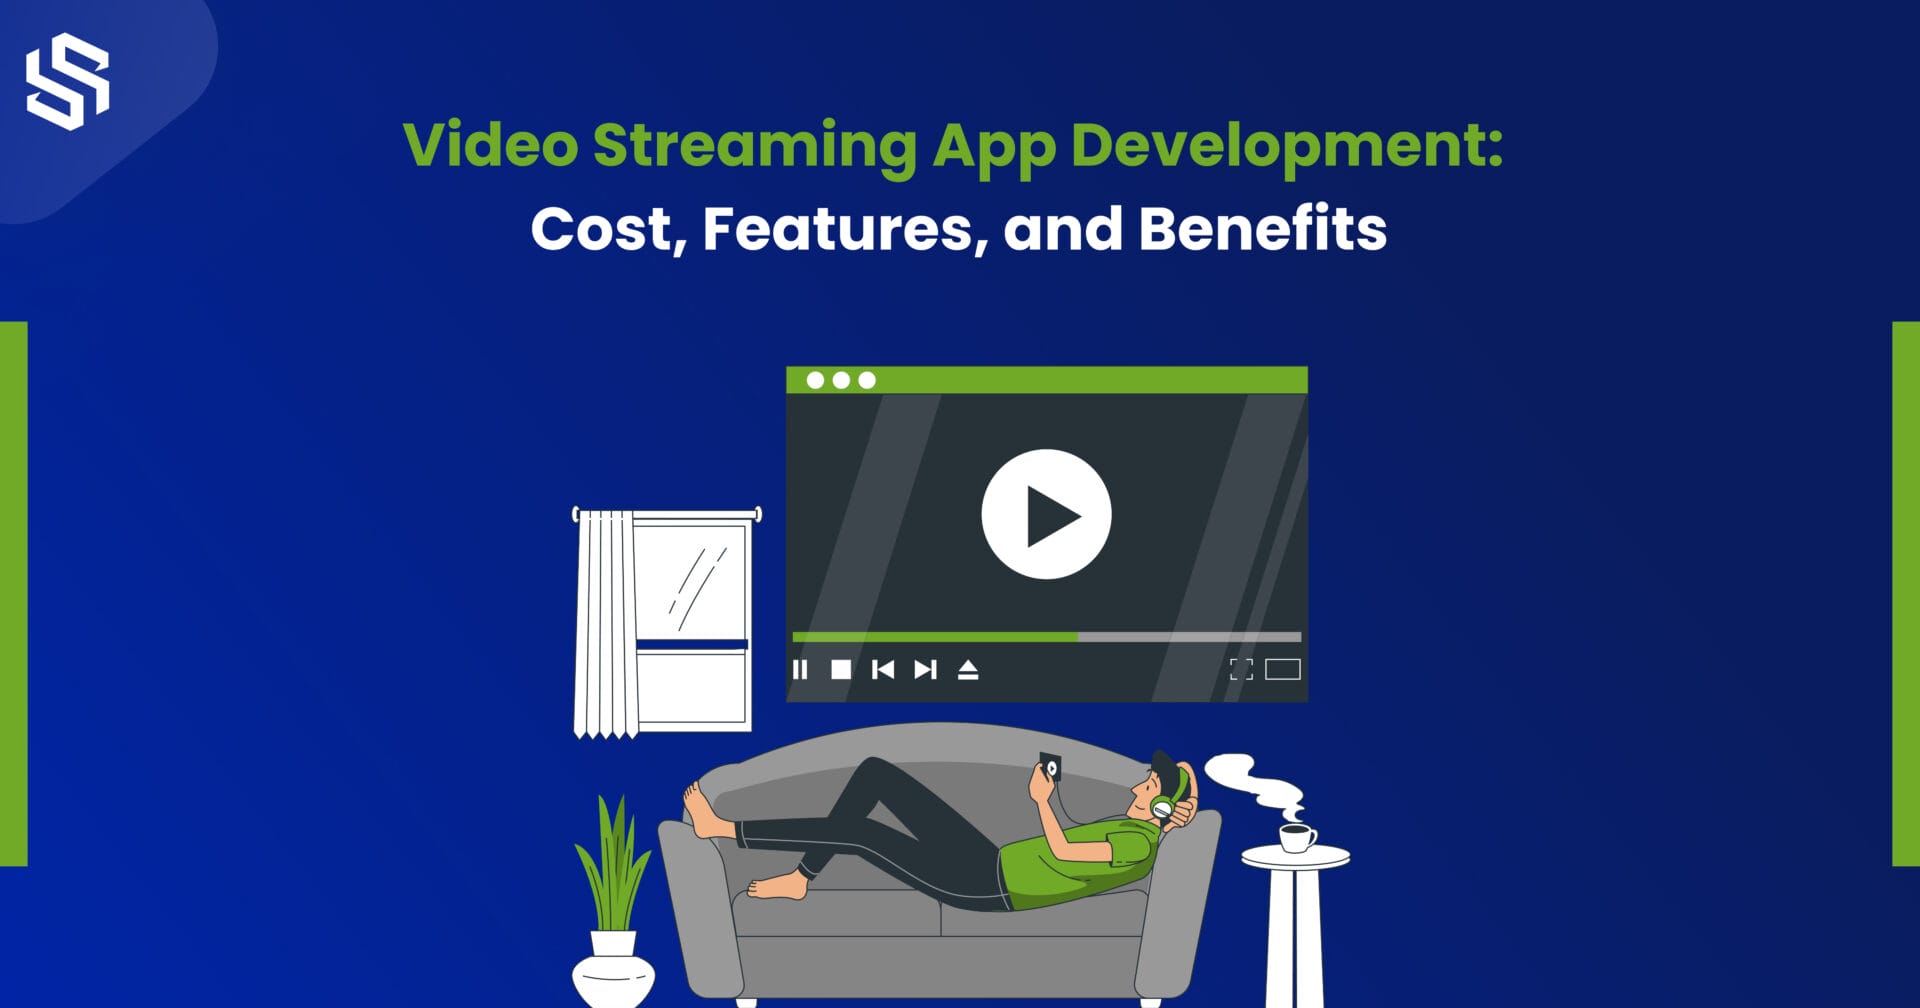 Video Streaming App Development Cost, Features, and Benefits